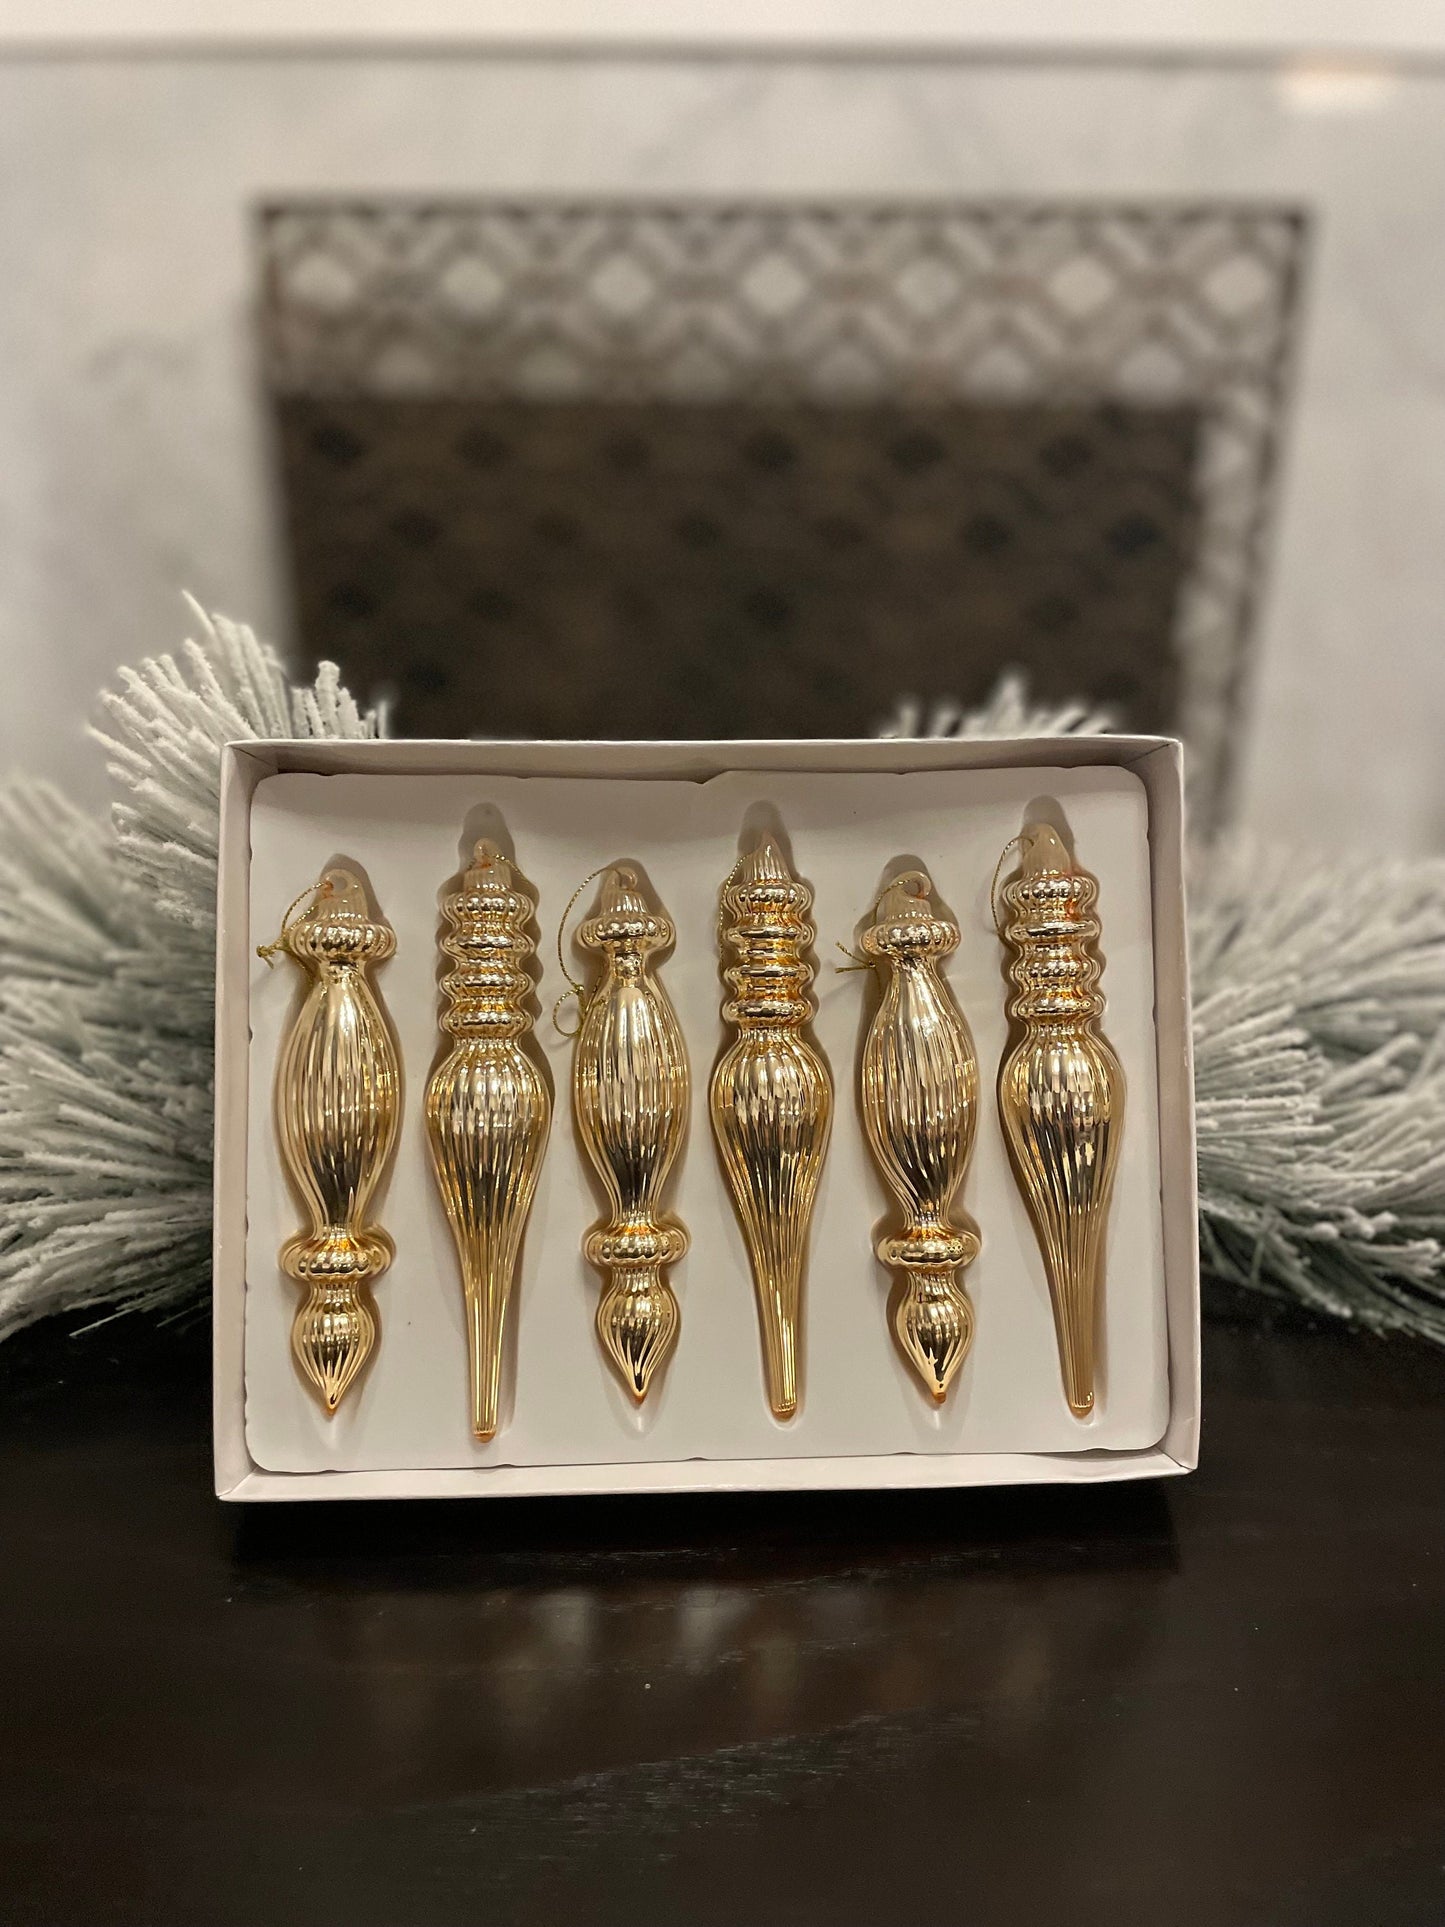 6.5” Box of gold finial ornaments. Glass. Set of 6.